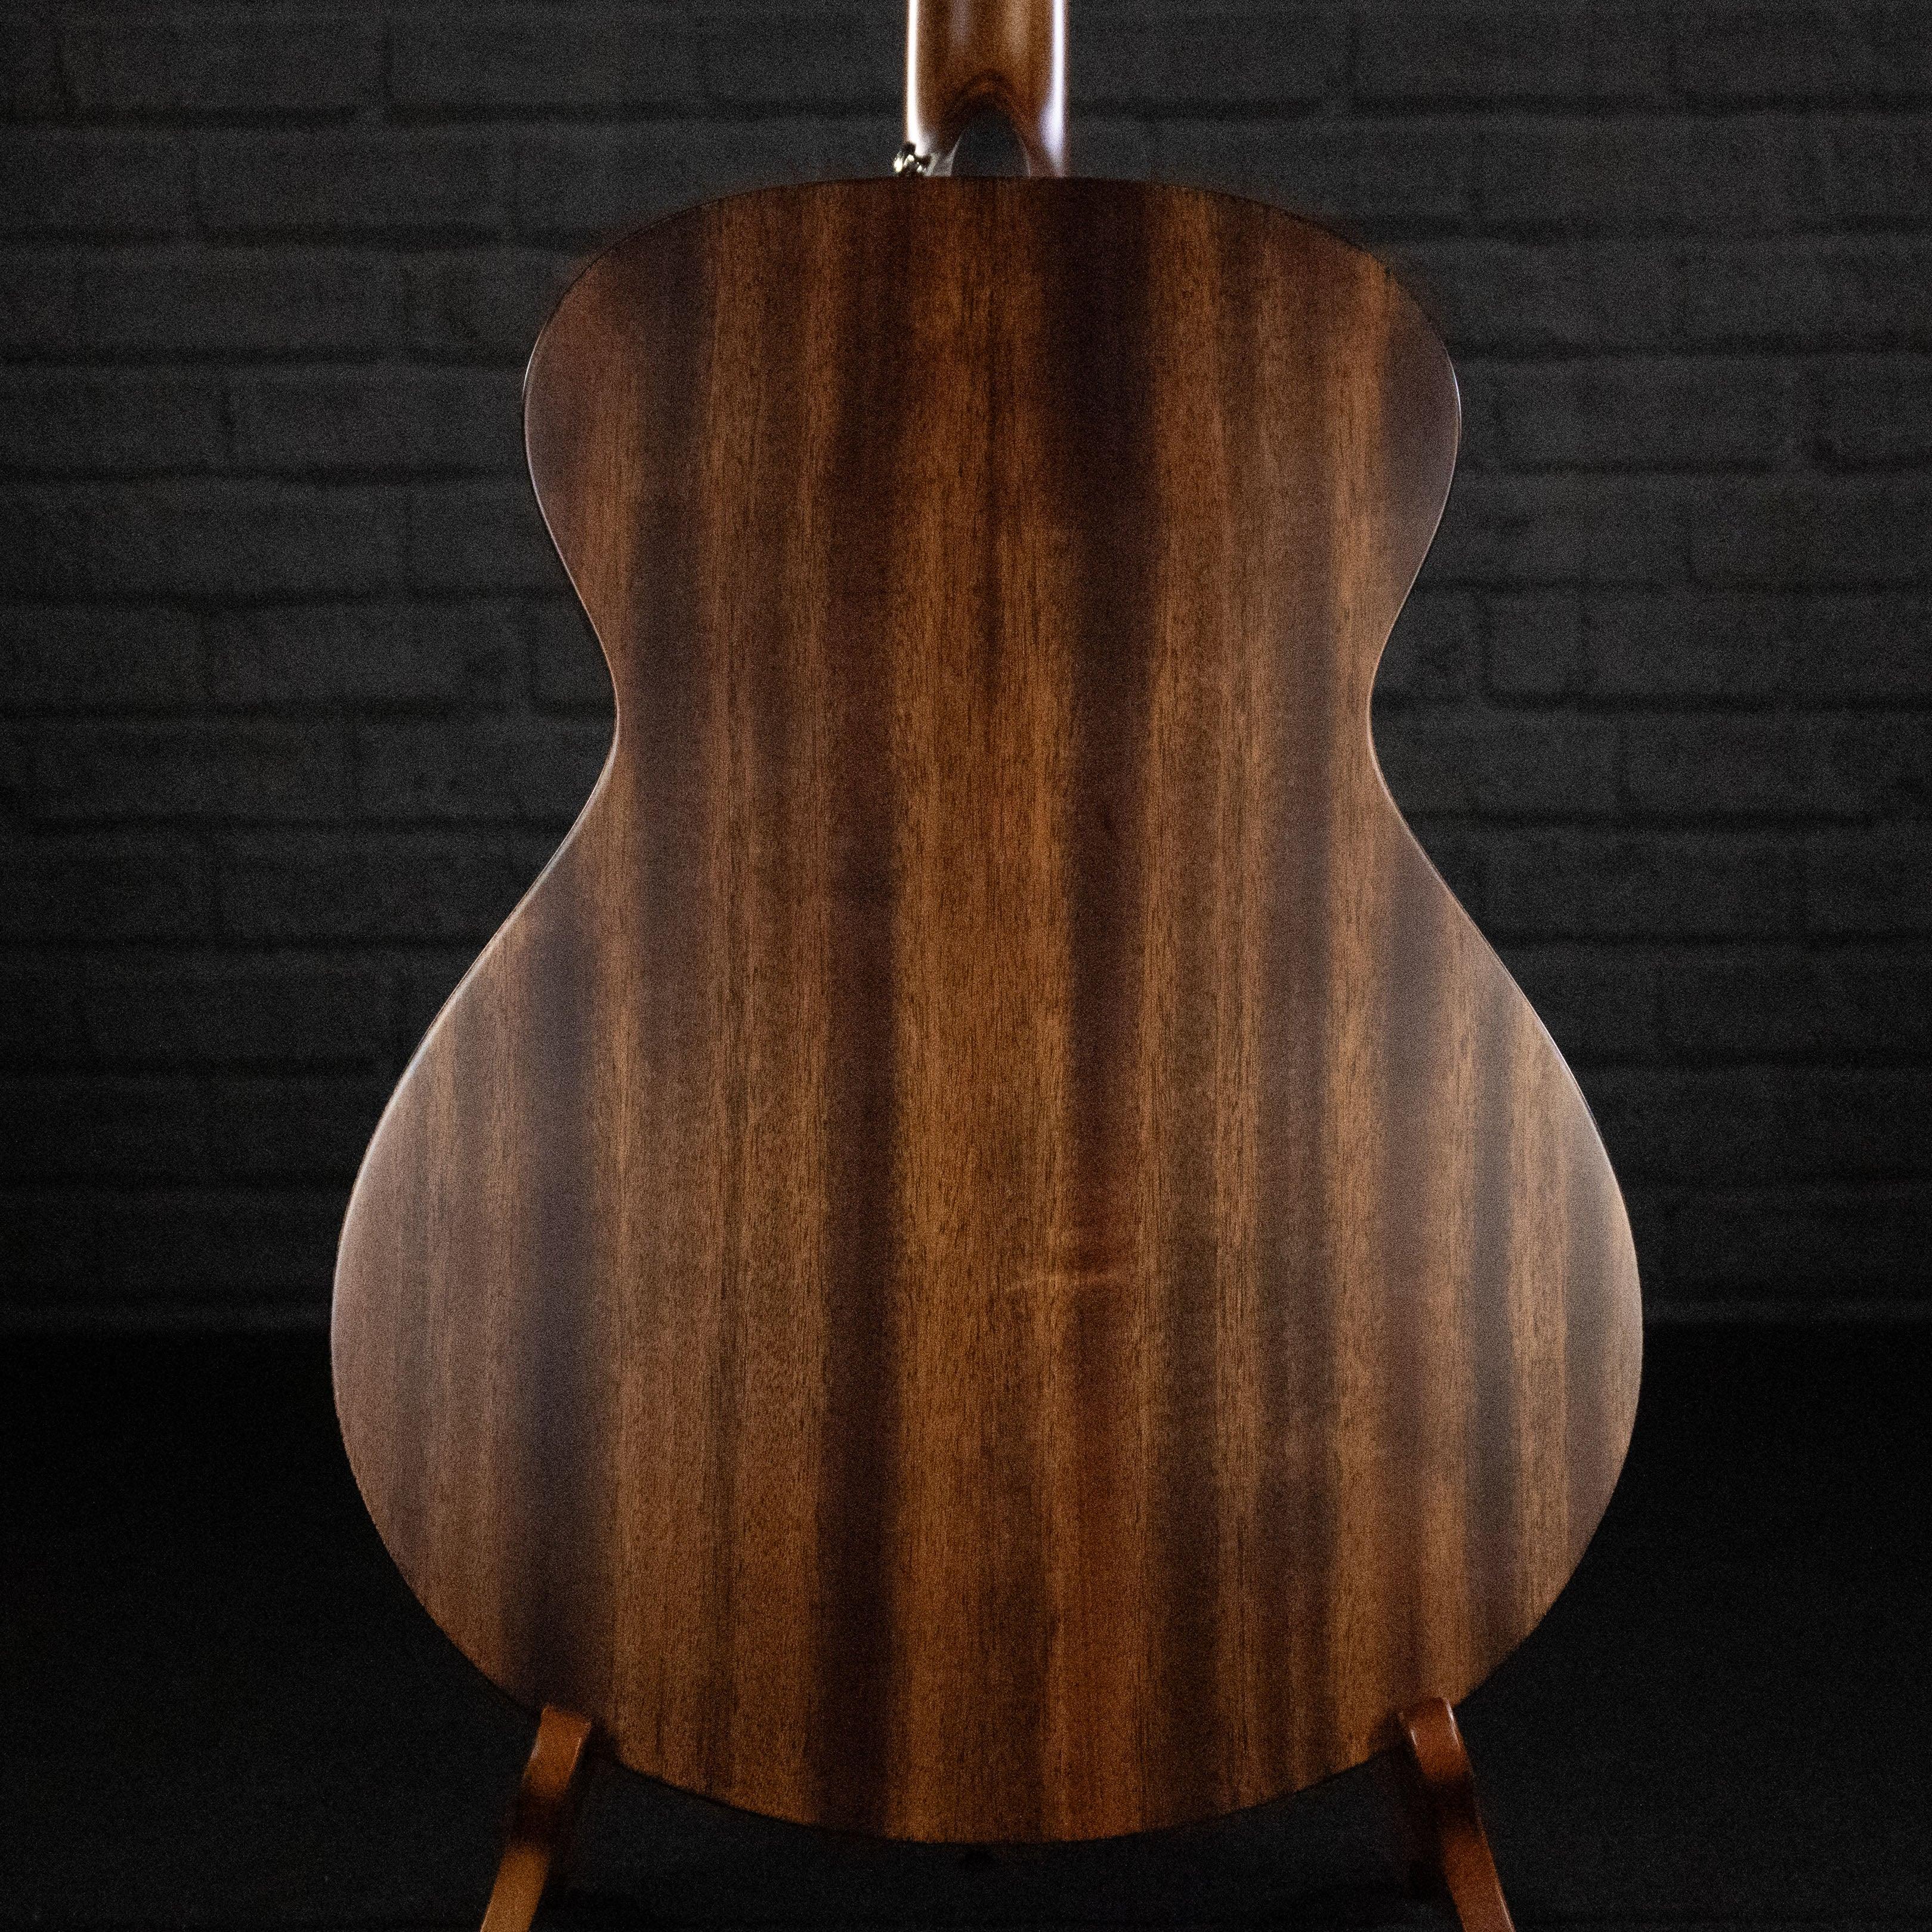 Breedlove Discovery S Concert (Sitka Spruce - African Mahogany) - Impulse Music Co.